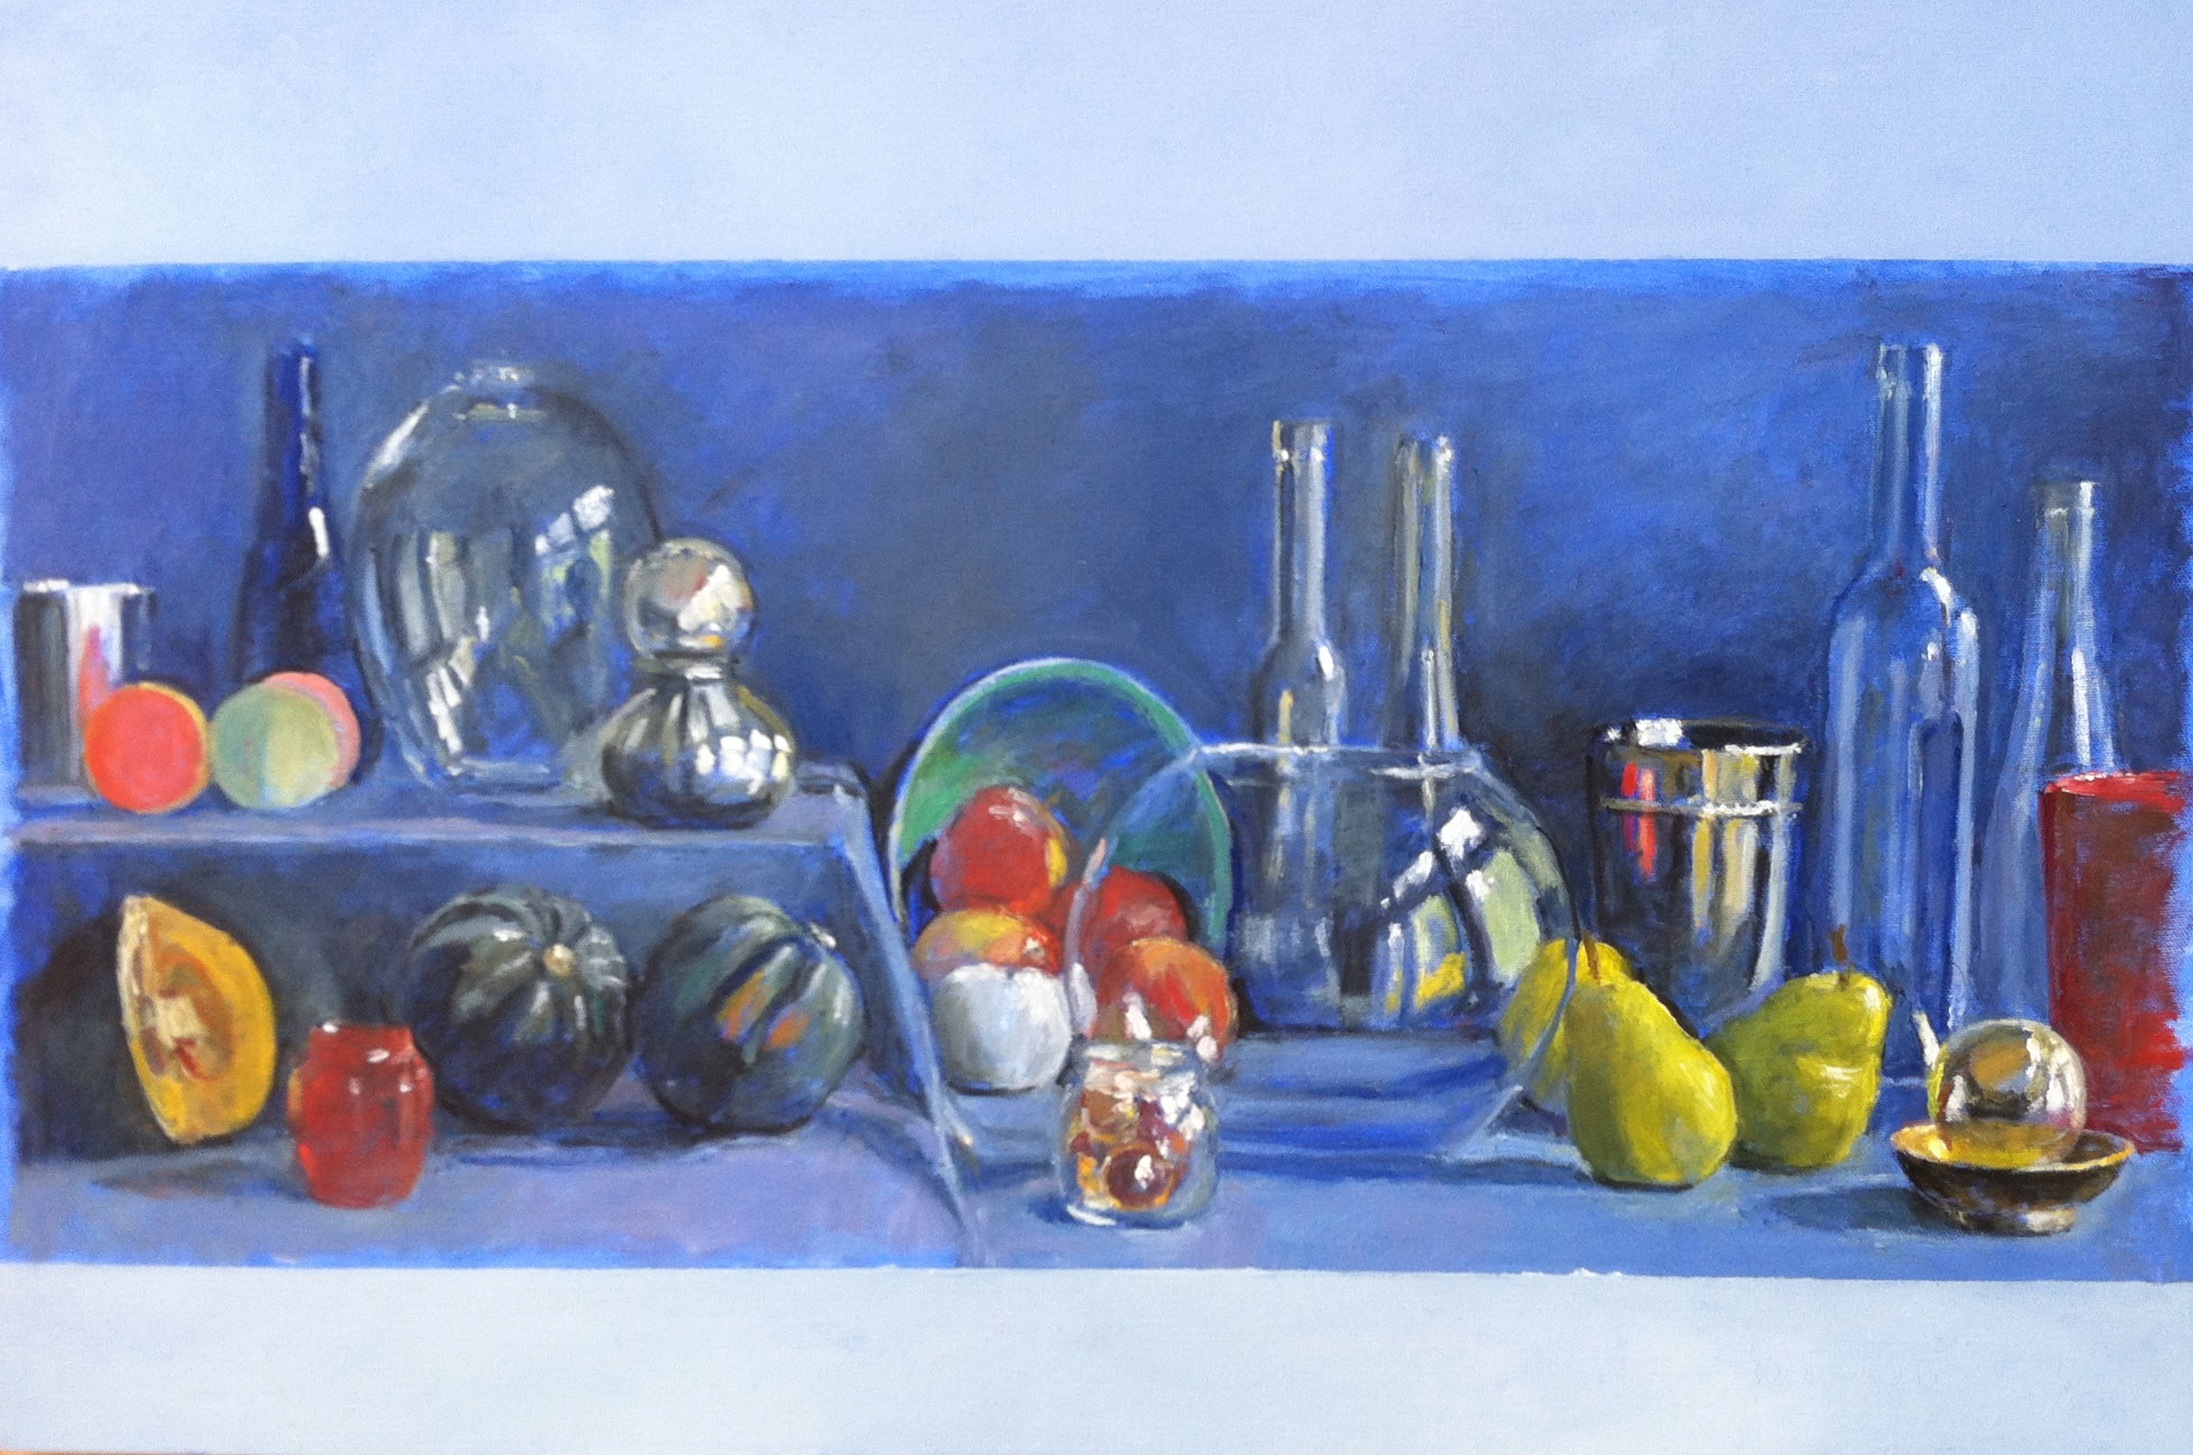 A Still Life out of the Blue by David Summers at Les Yeux du Monde Gallery